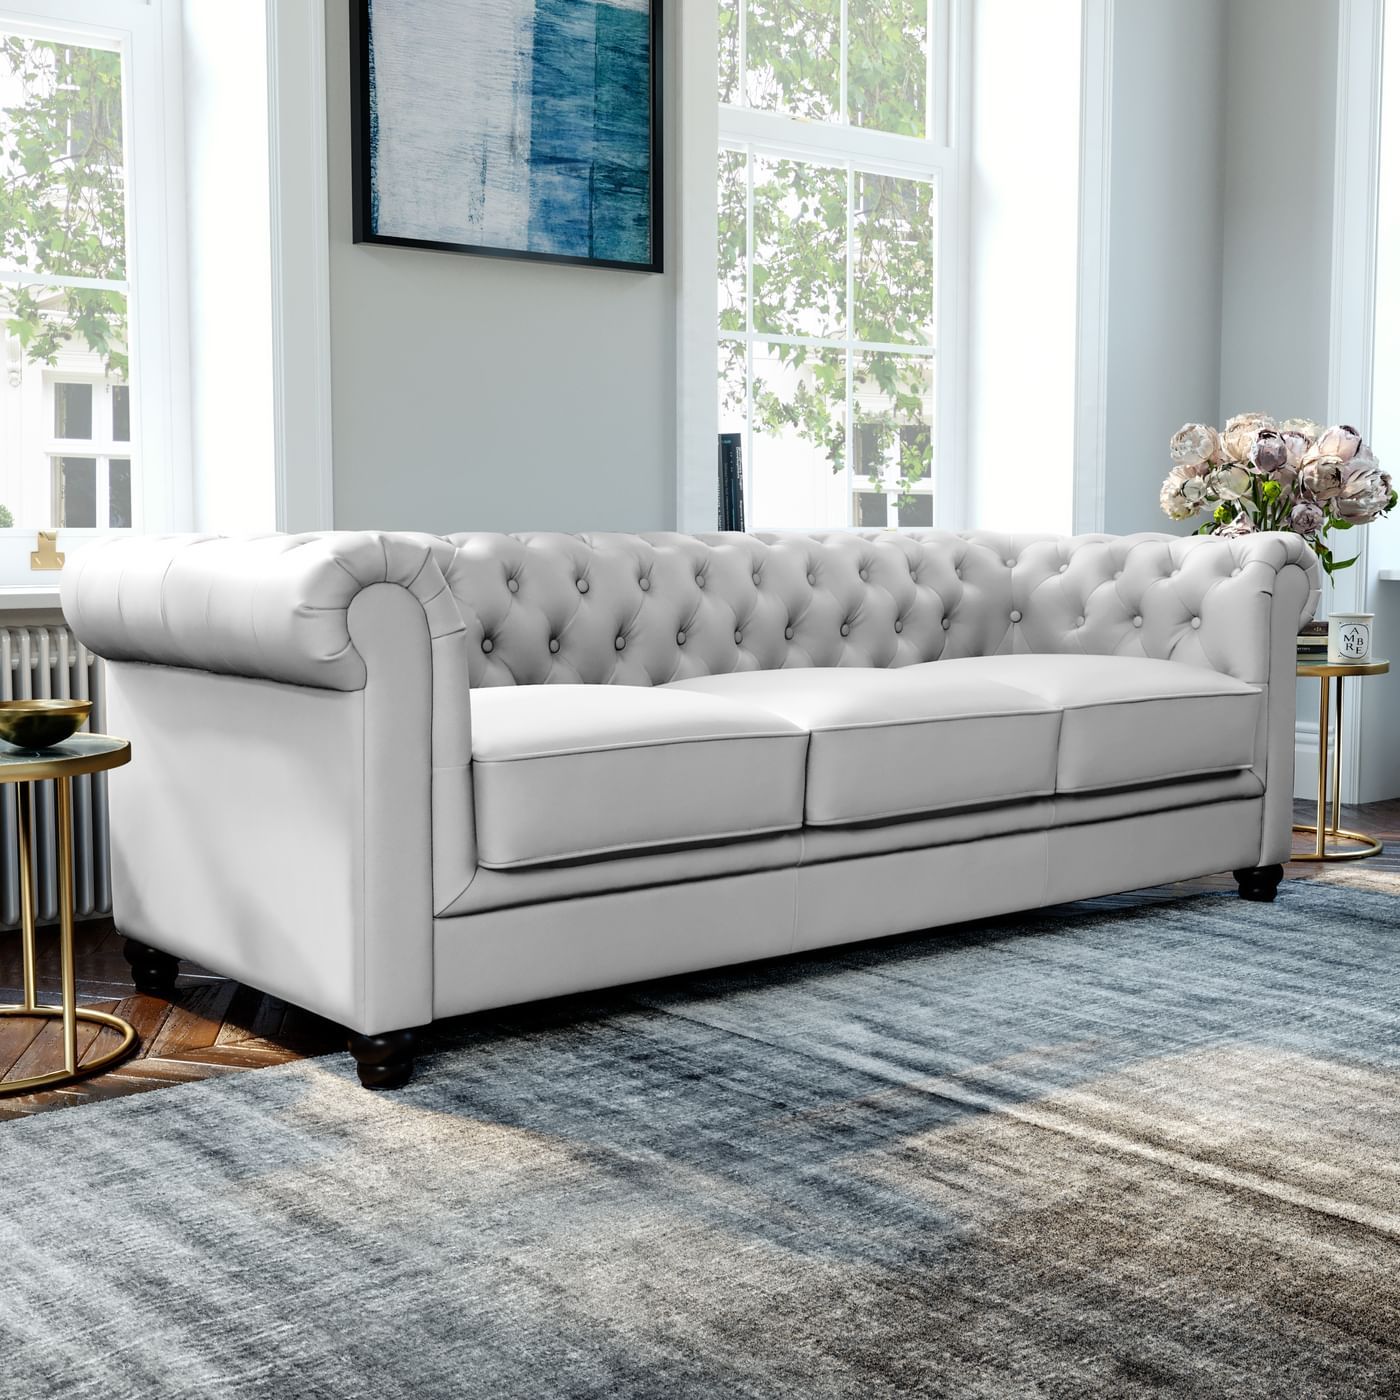 Hampton Light Grey Leather 3 Seater Chesterfield Sofa | Furniture Choice With Sofas In Light Grey (View 3 of 20)